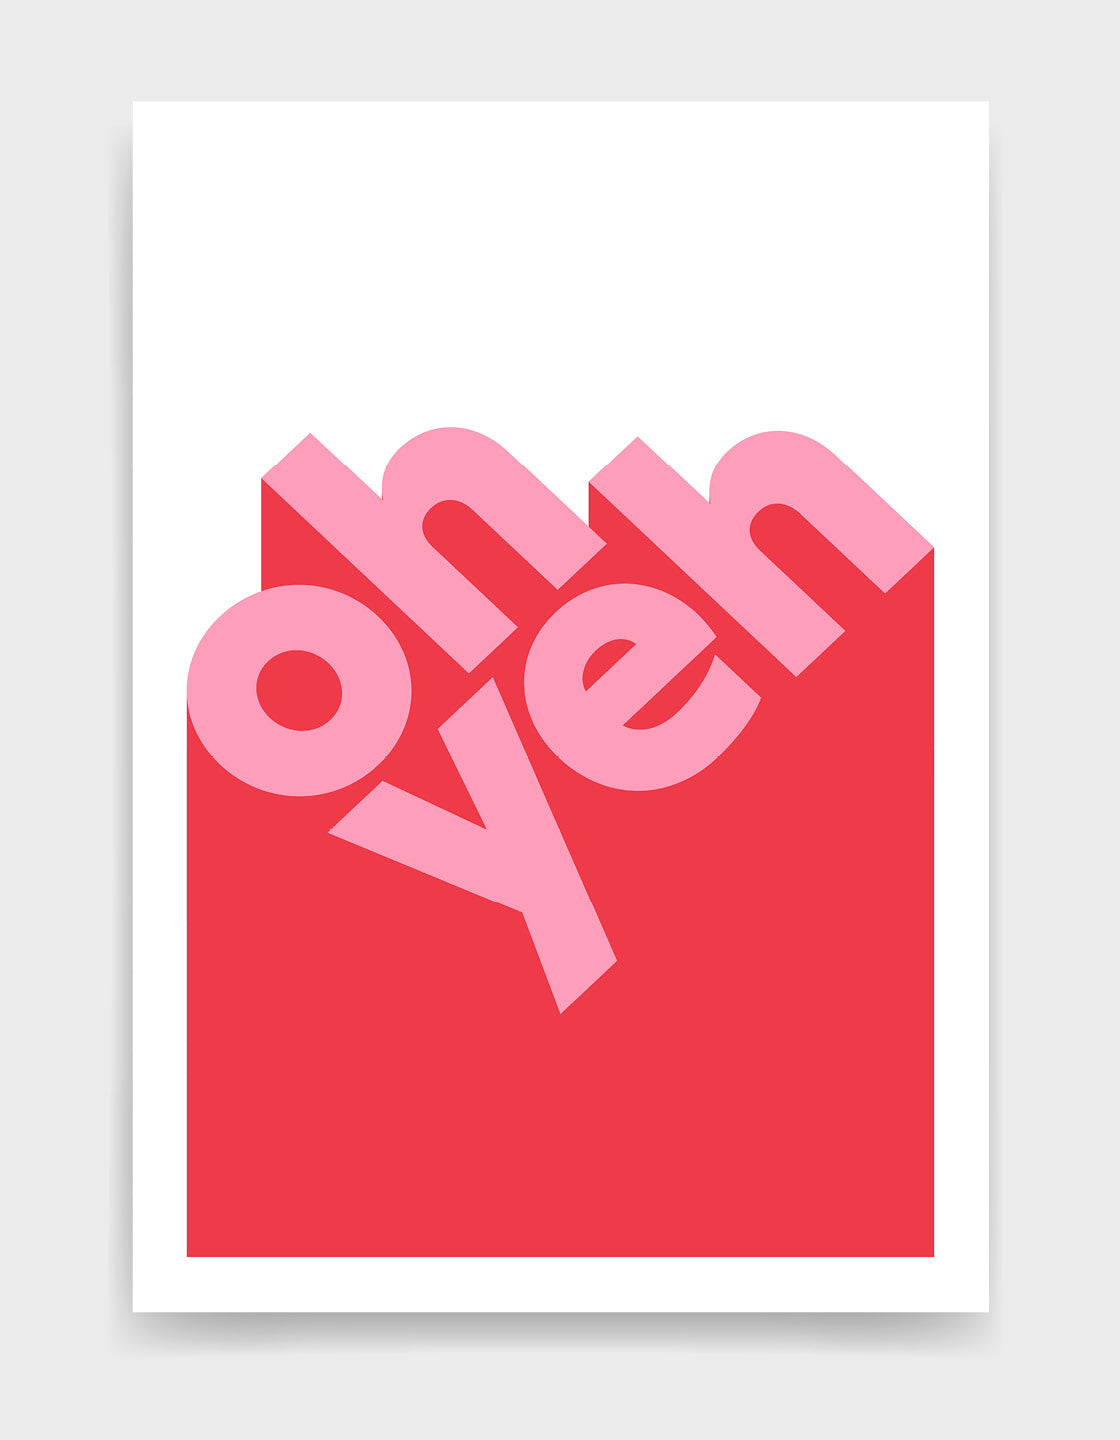 modern typography print with the words oh yeh in lower case pink text against a red and white background